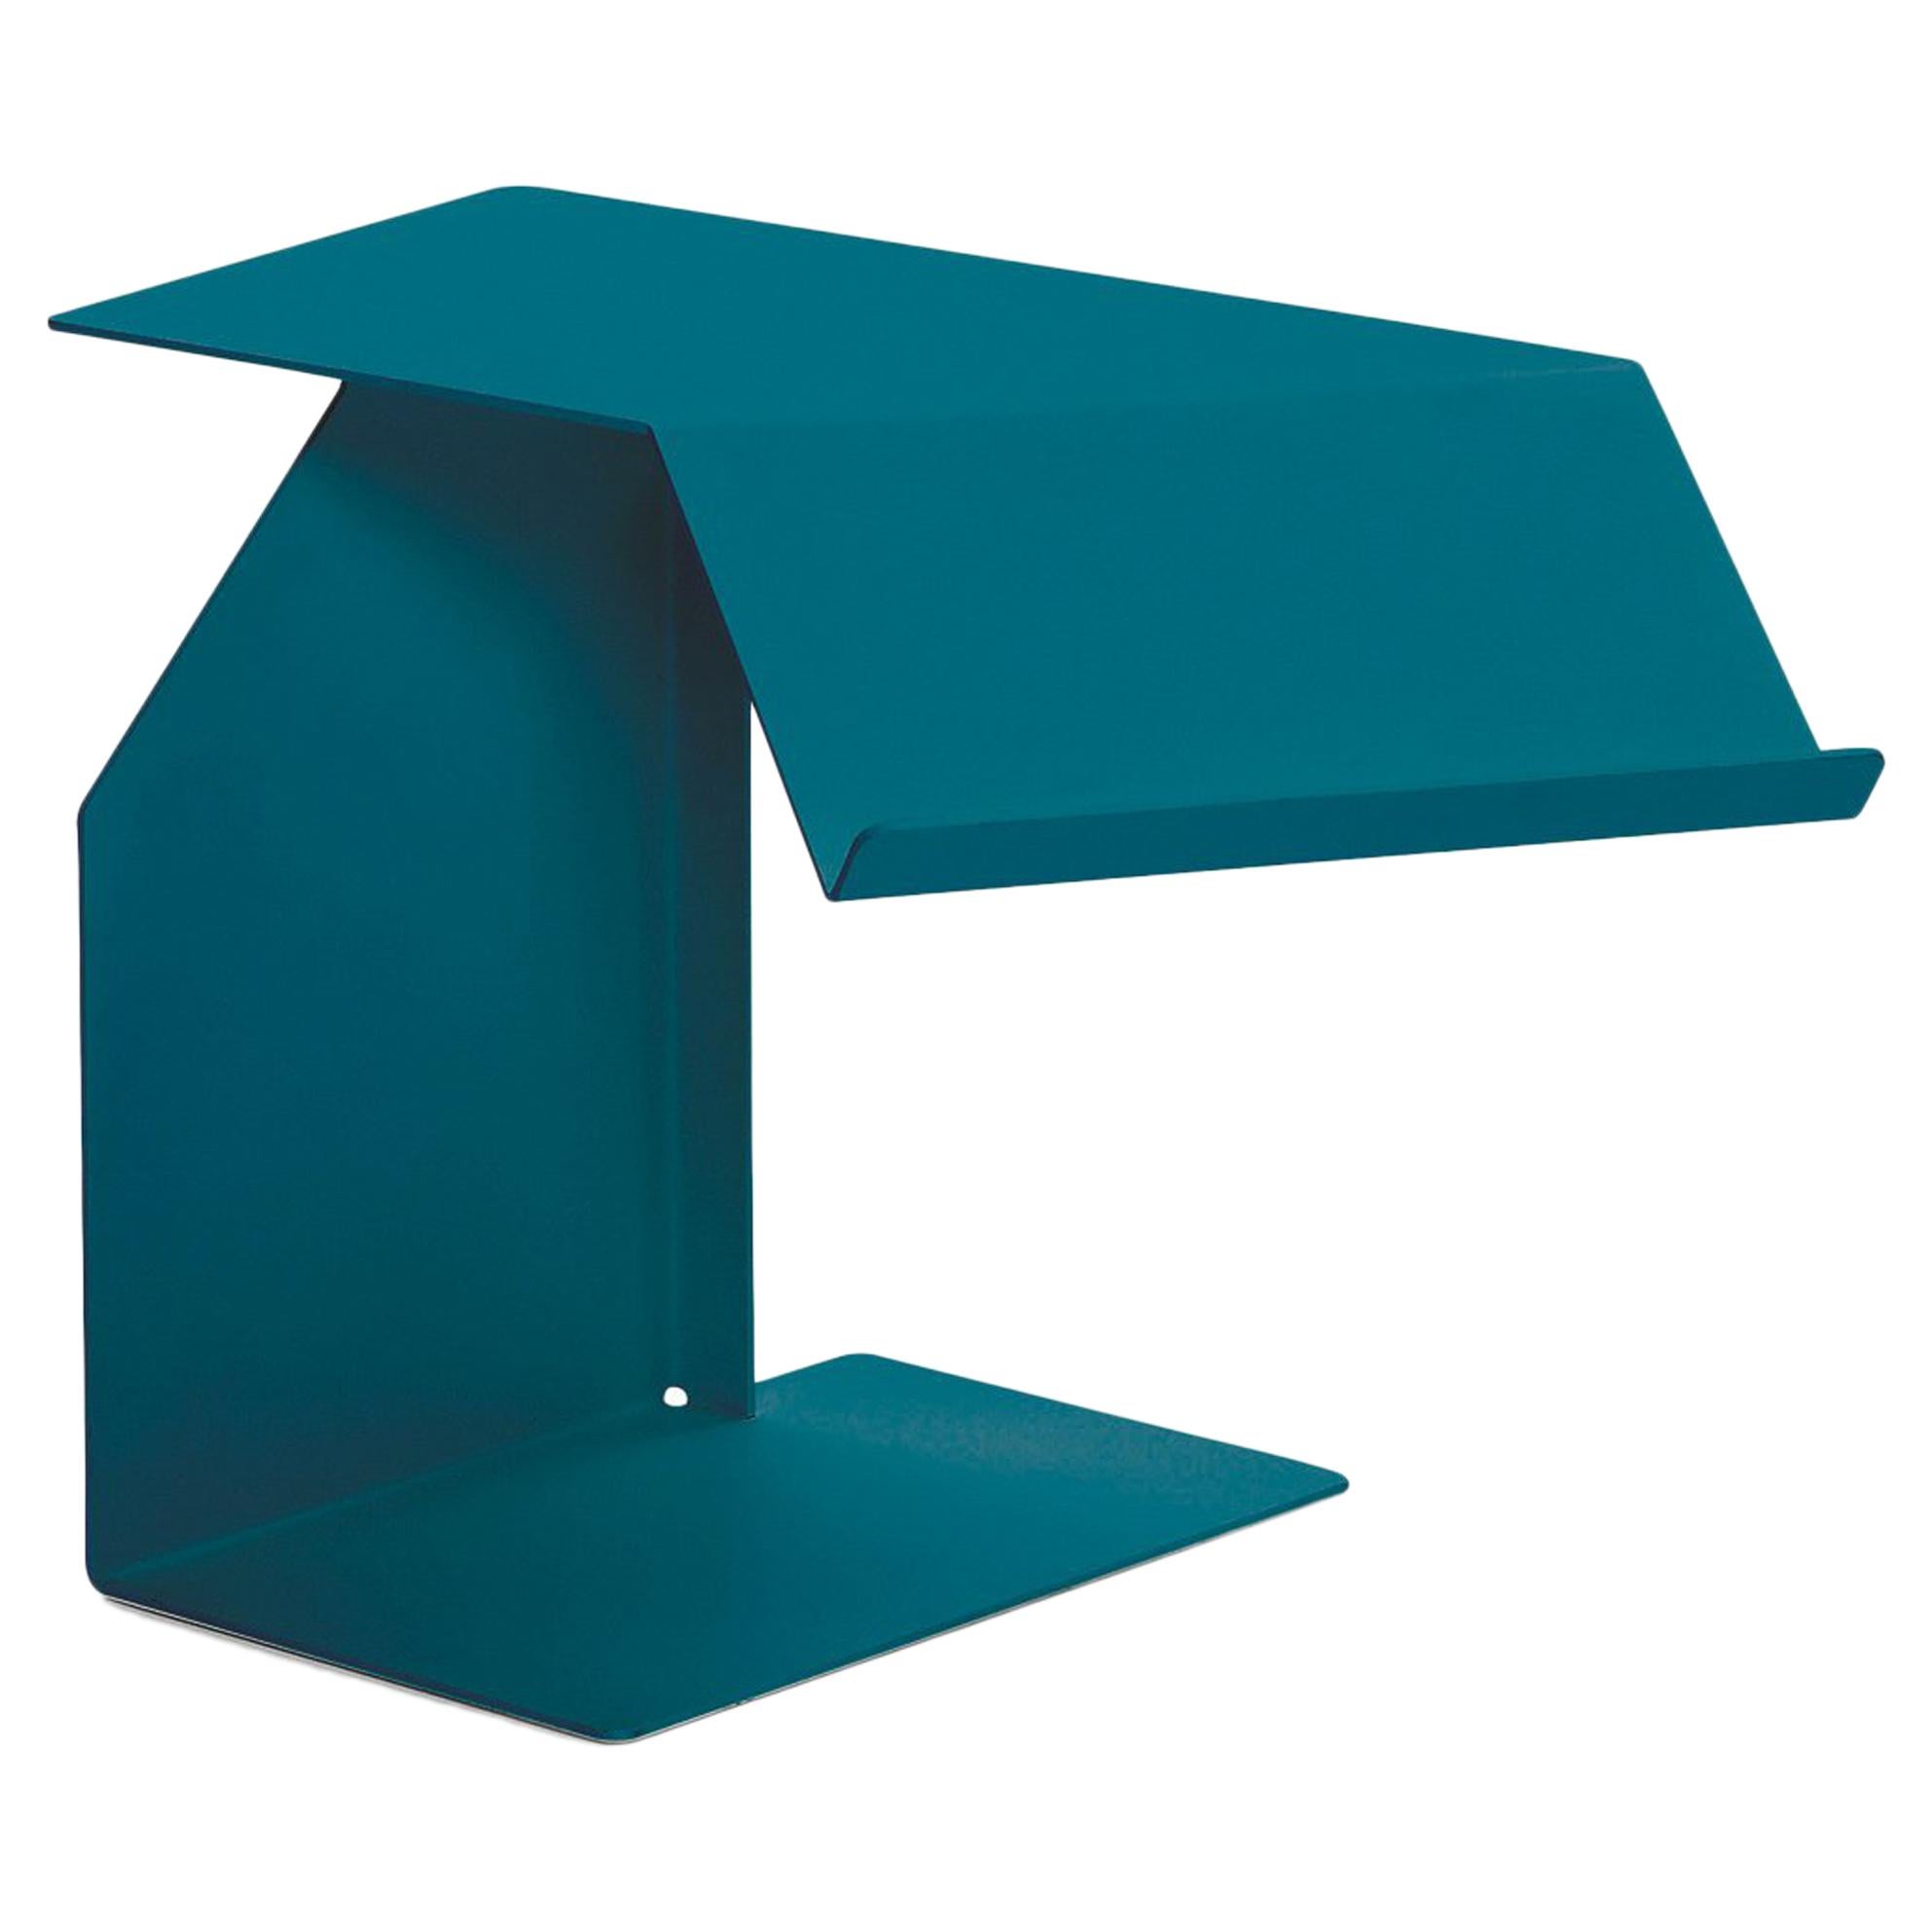 ClassiCon Diana F Side Table in Ocean Blue by Konstantin Grcic